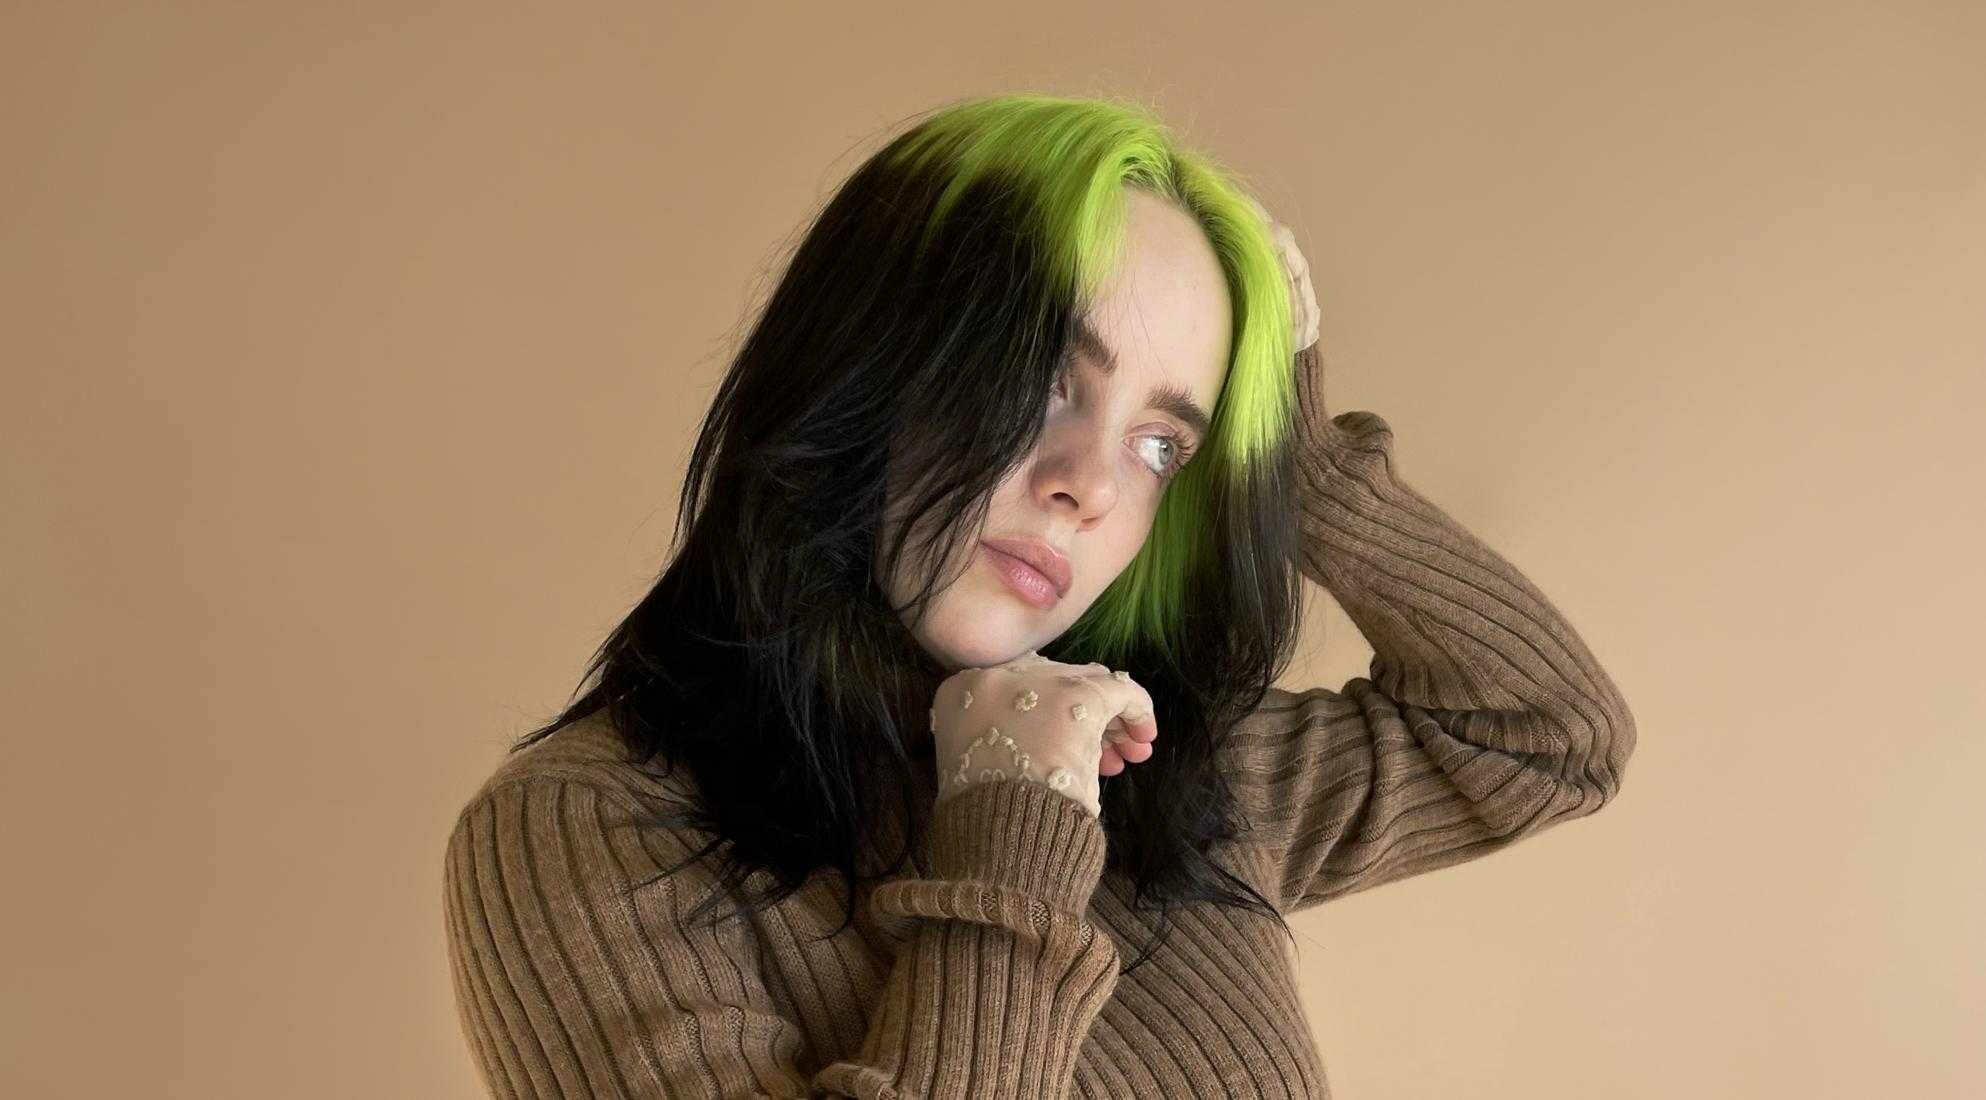 Billie Eilish: When We All Fall Asleep, Where Do We Go?, Topped the charts in the UK, the US and around the world. 1990x1100 HD Background.